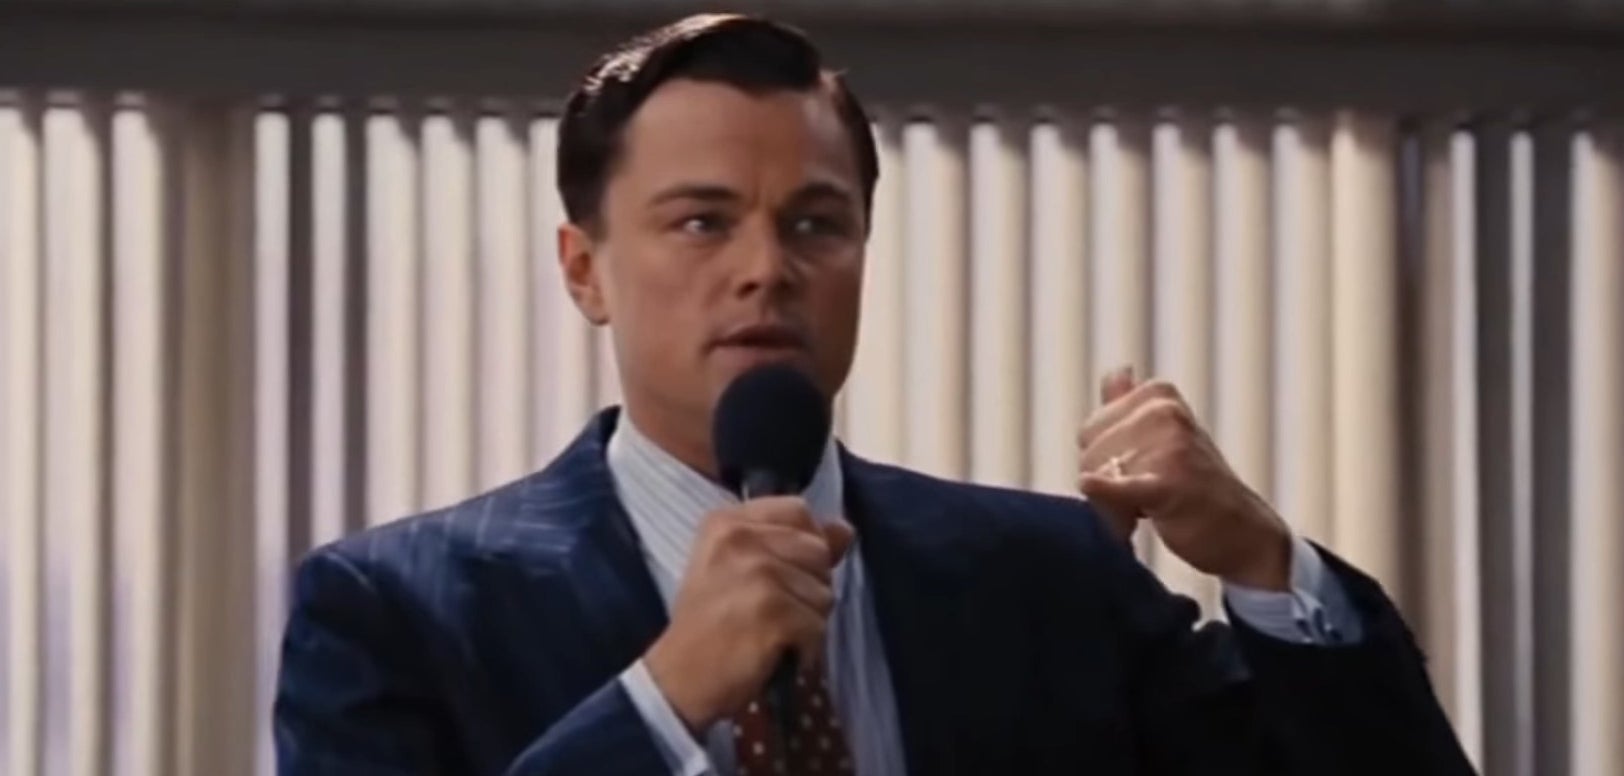 Jordan Belfort holding a microphone in &quot;The Wolf of Wall Street&quot;